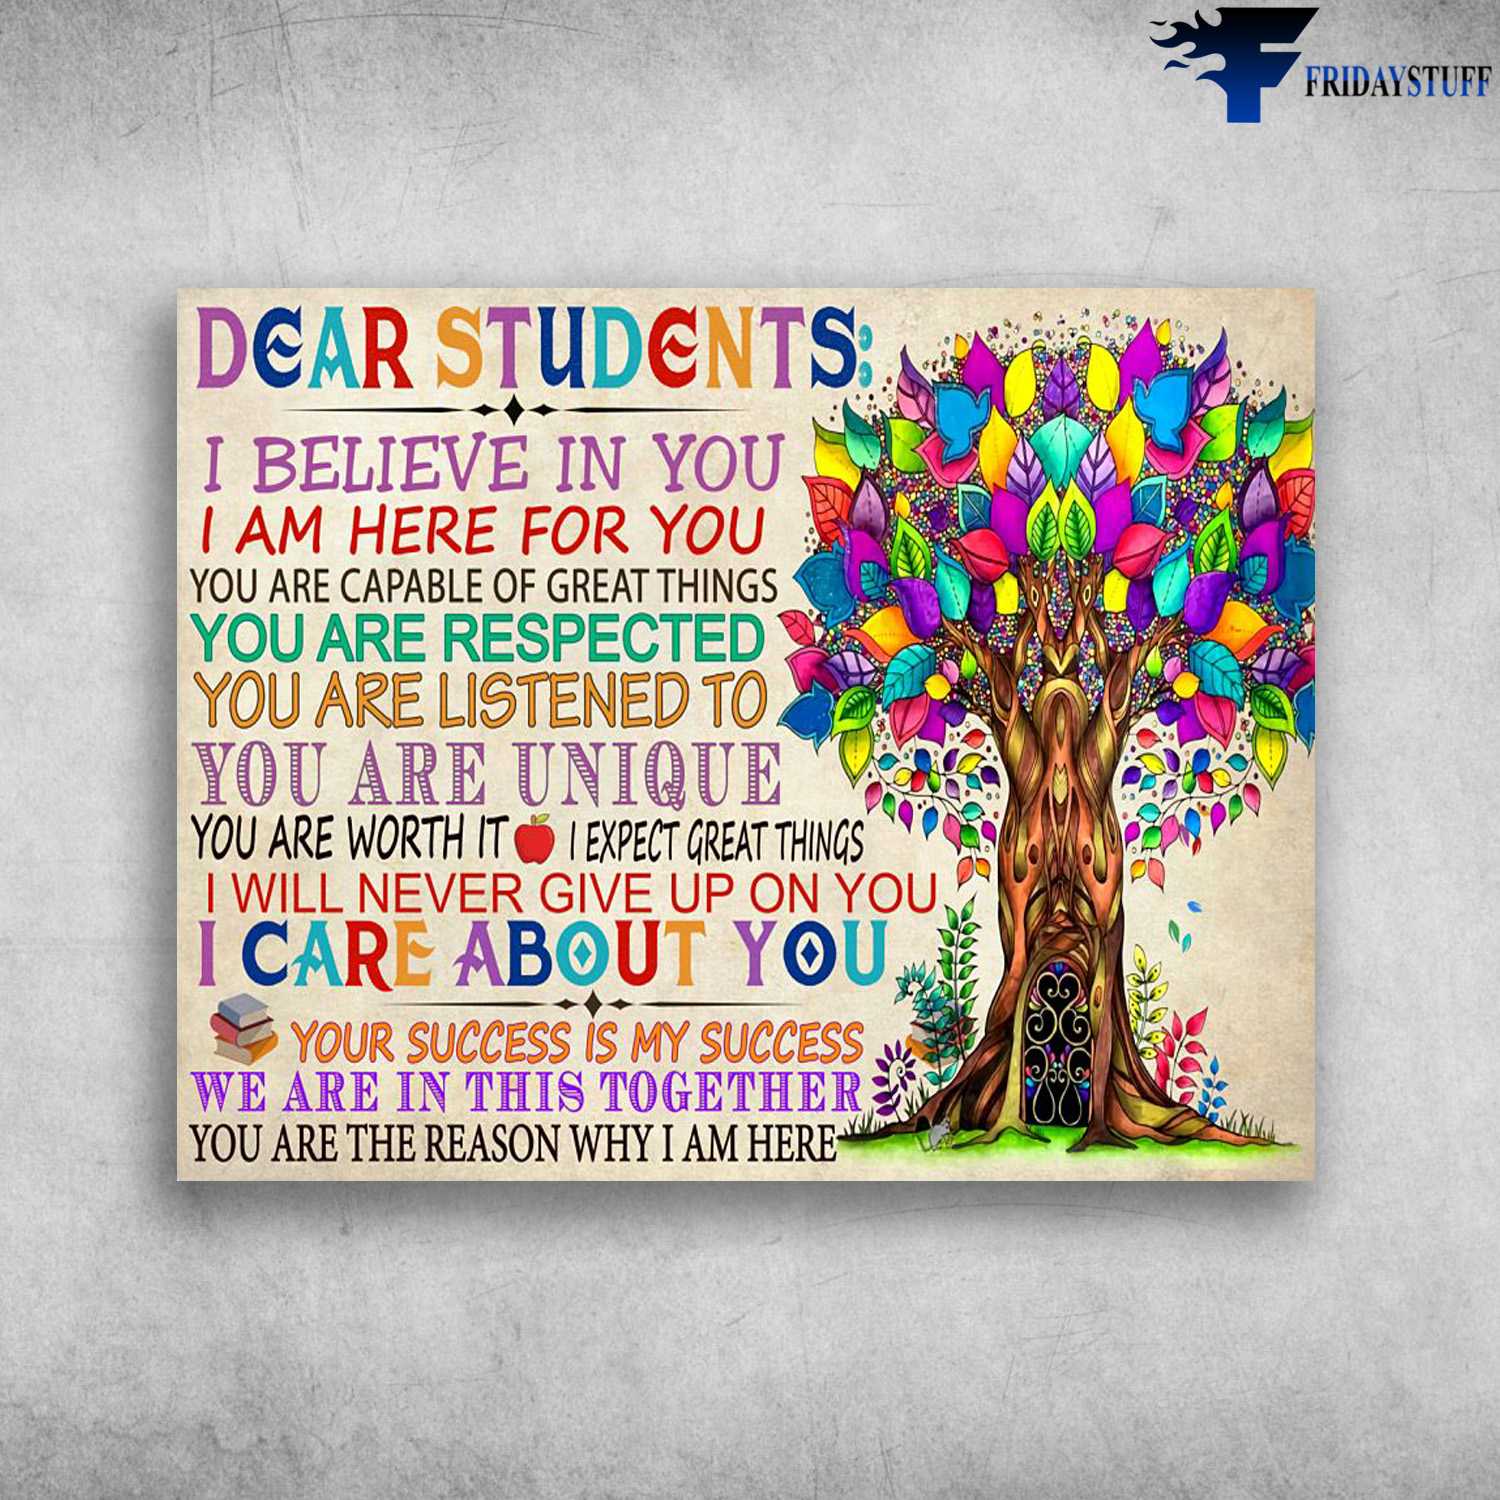 Classroom Poster, Classroom Rule, Dear Students, I Believe In You, I Am Here For You, You Are Capable Of Great Things